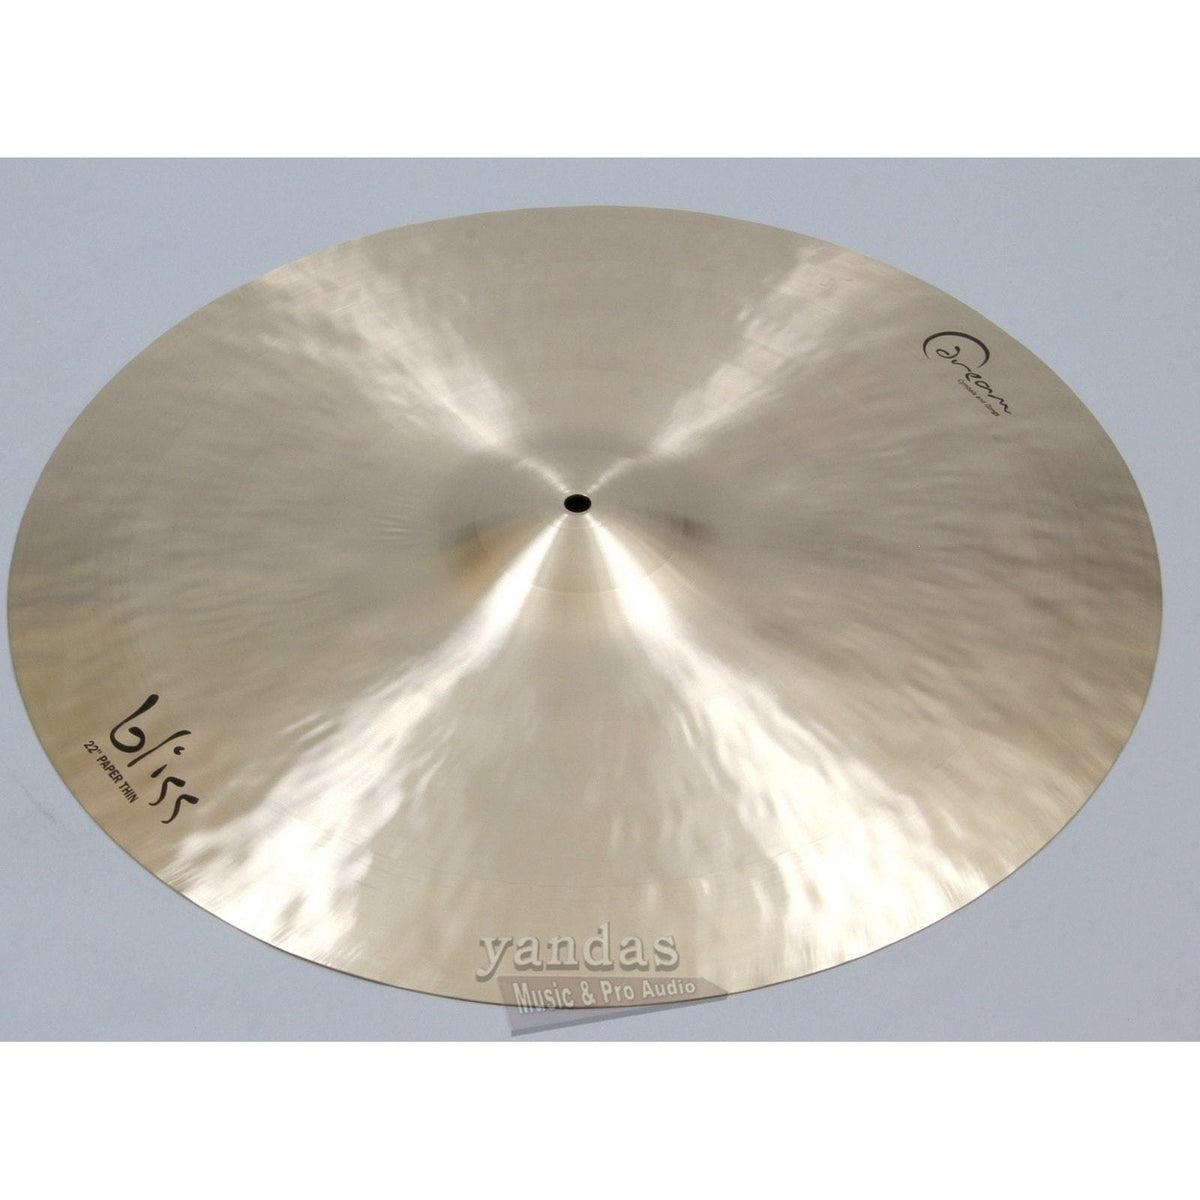 Dream Cymbals Bliss Paper Thin Crash Cymbal 22 Inch